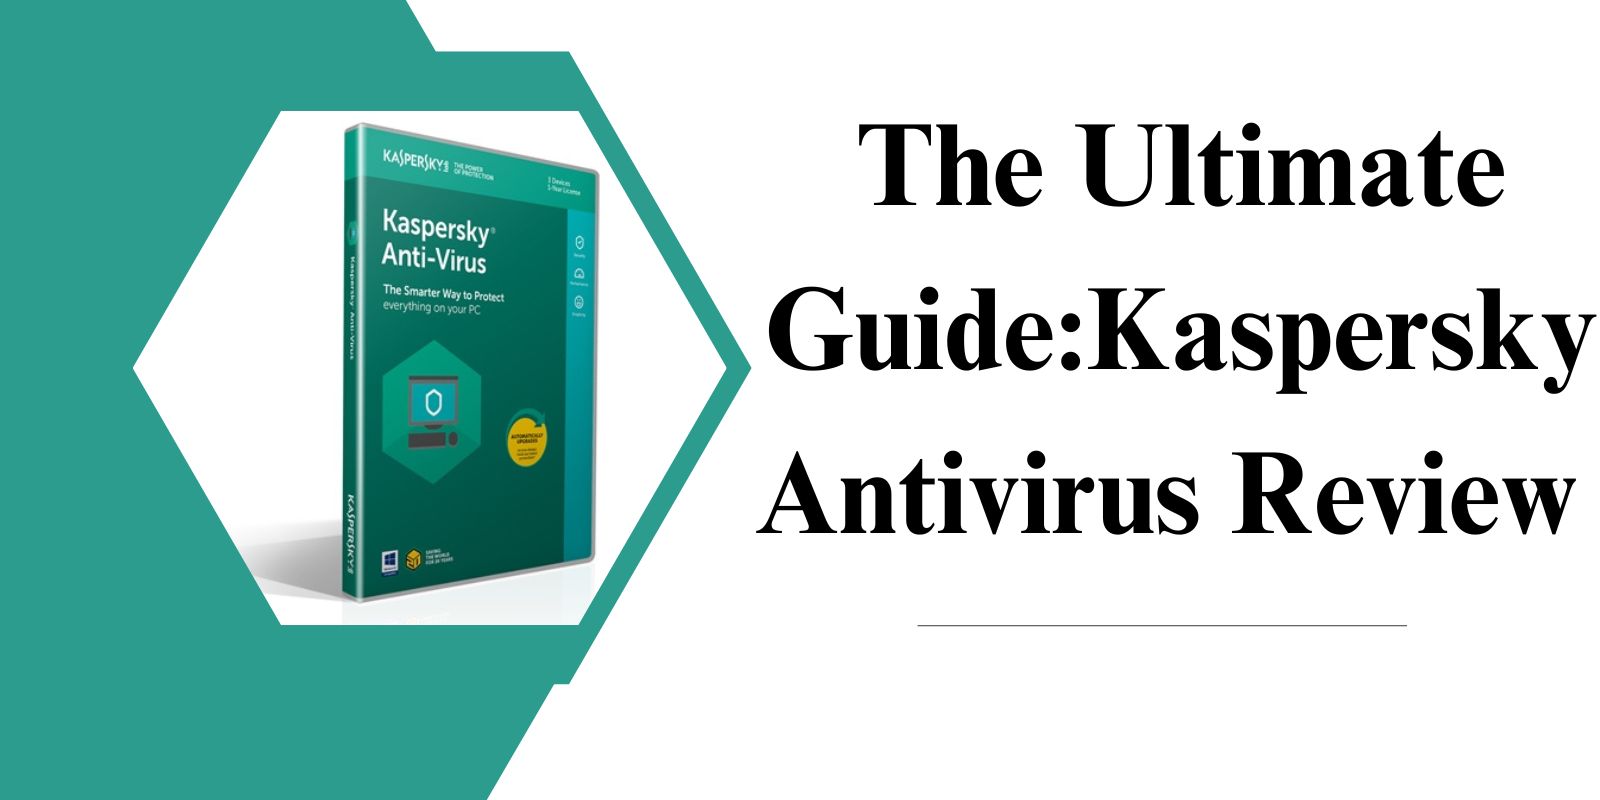 The Ultimate Guide: Kaspersky Antivirus Review